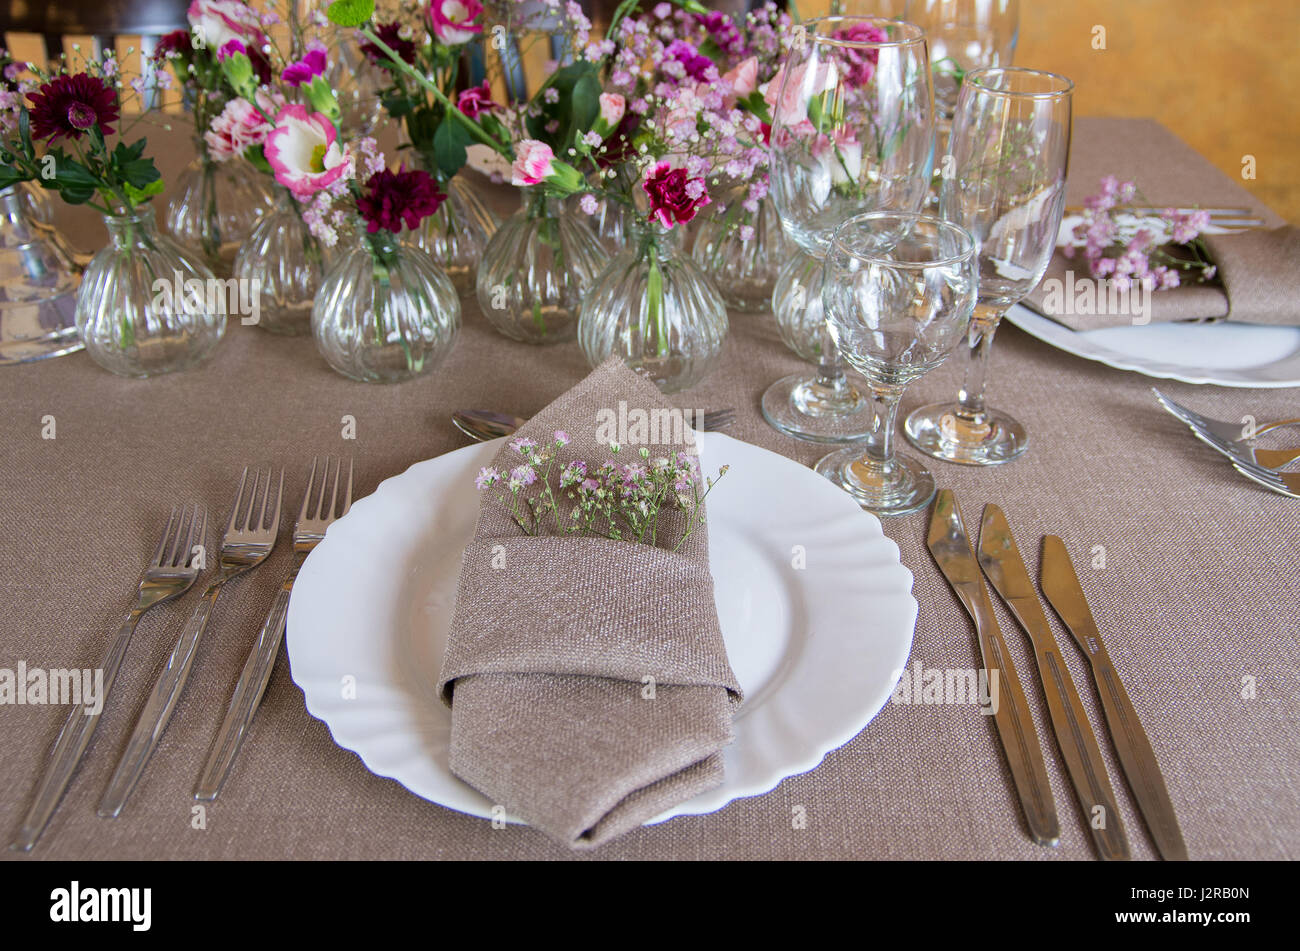 Restaurant table with cutlery and vases with flowers Stock Photo